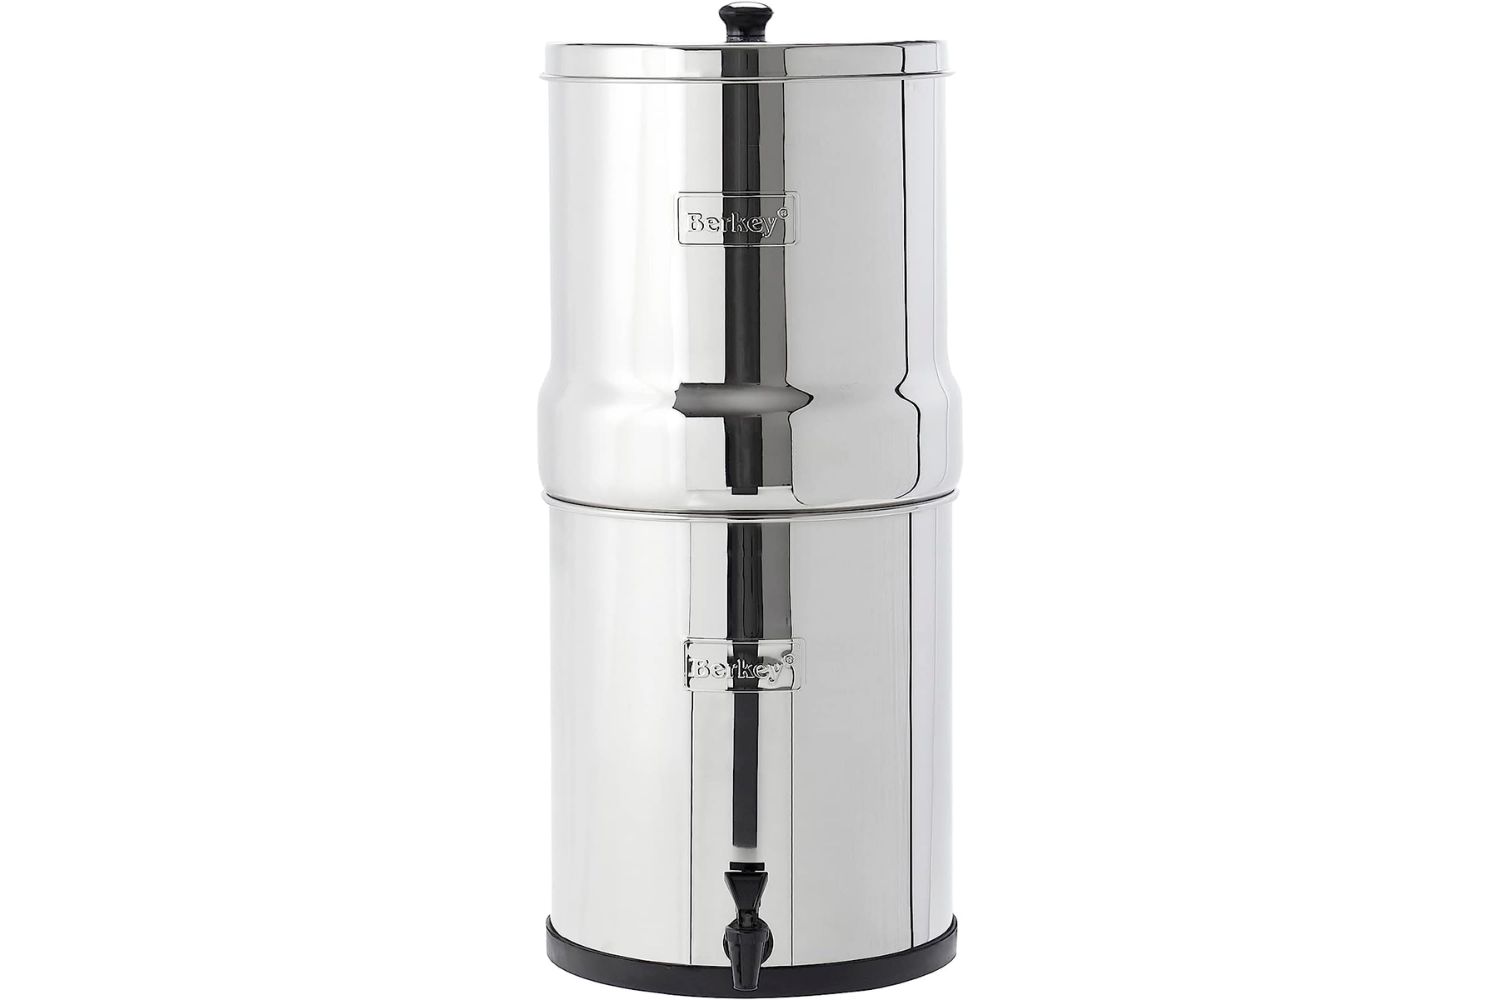 The Best Filters for Your Drinking Option: Big Berkey Gravity-Fed Water Filter